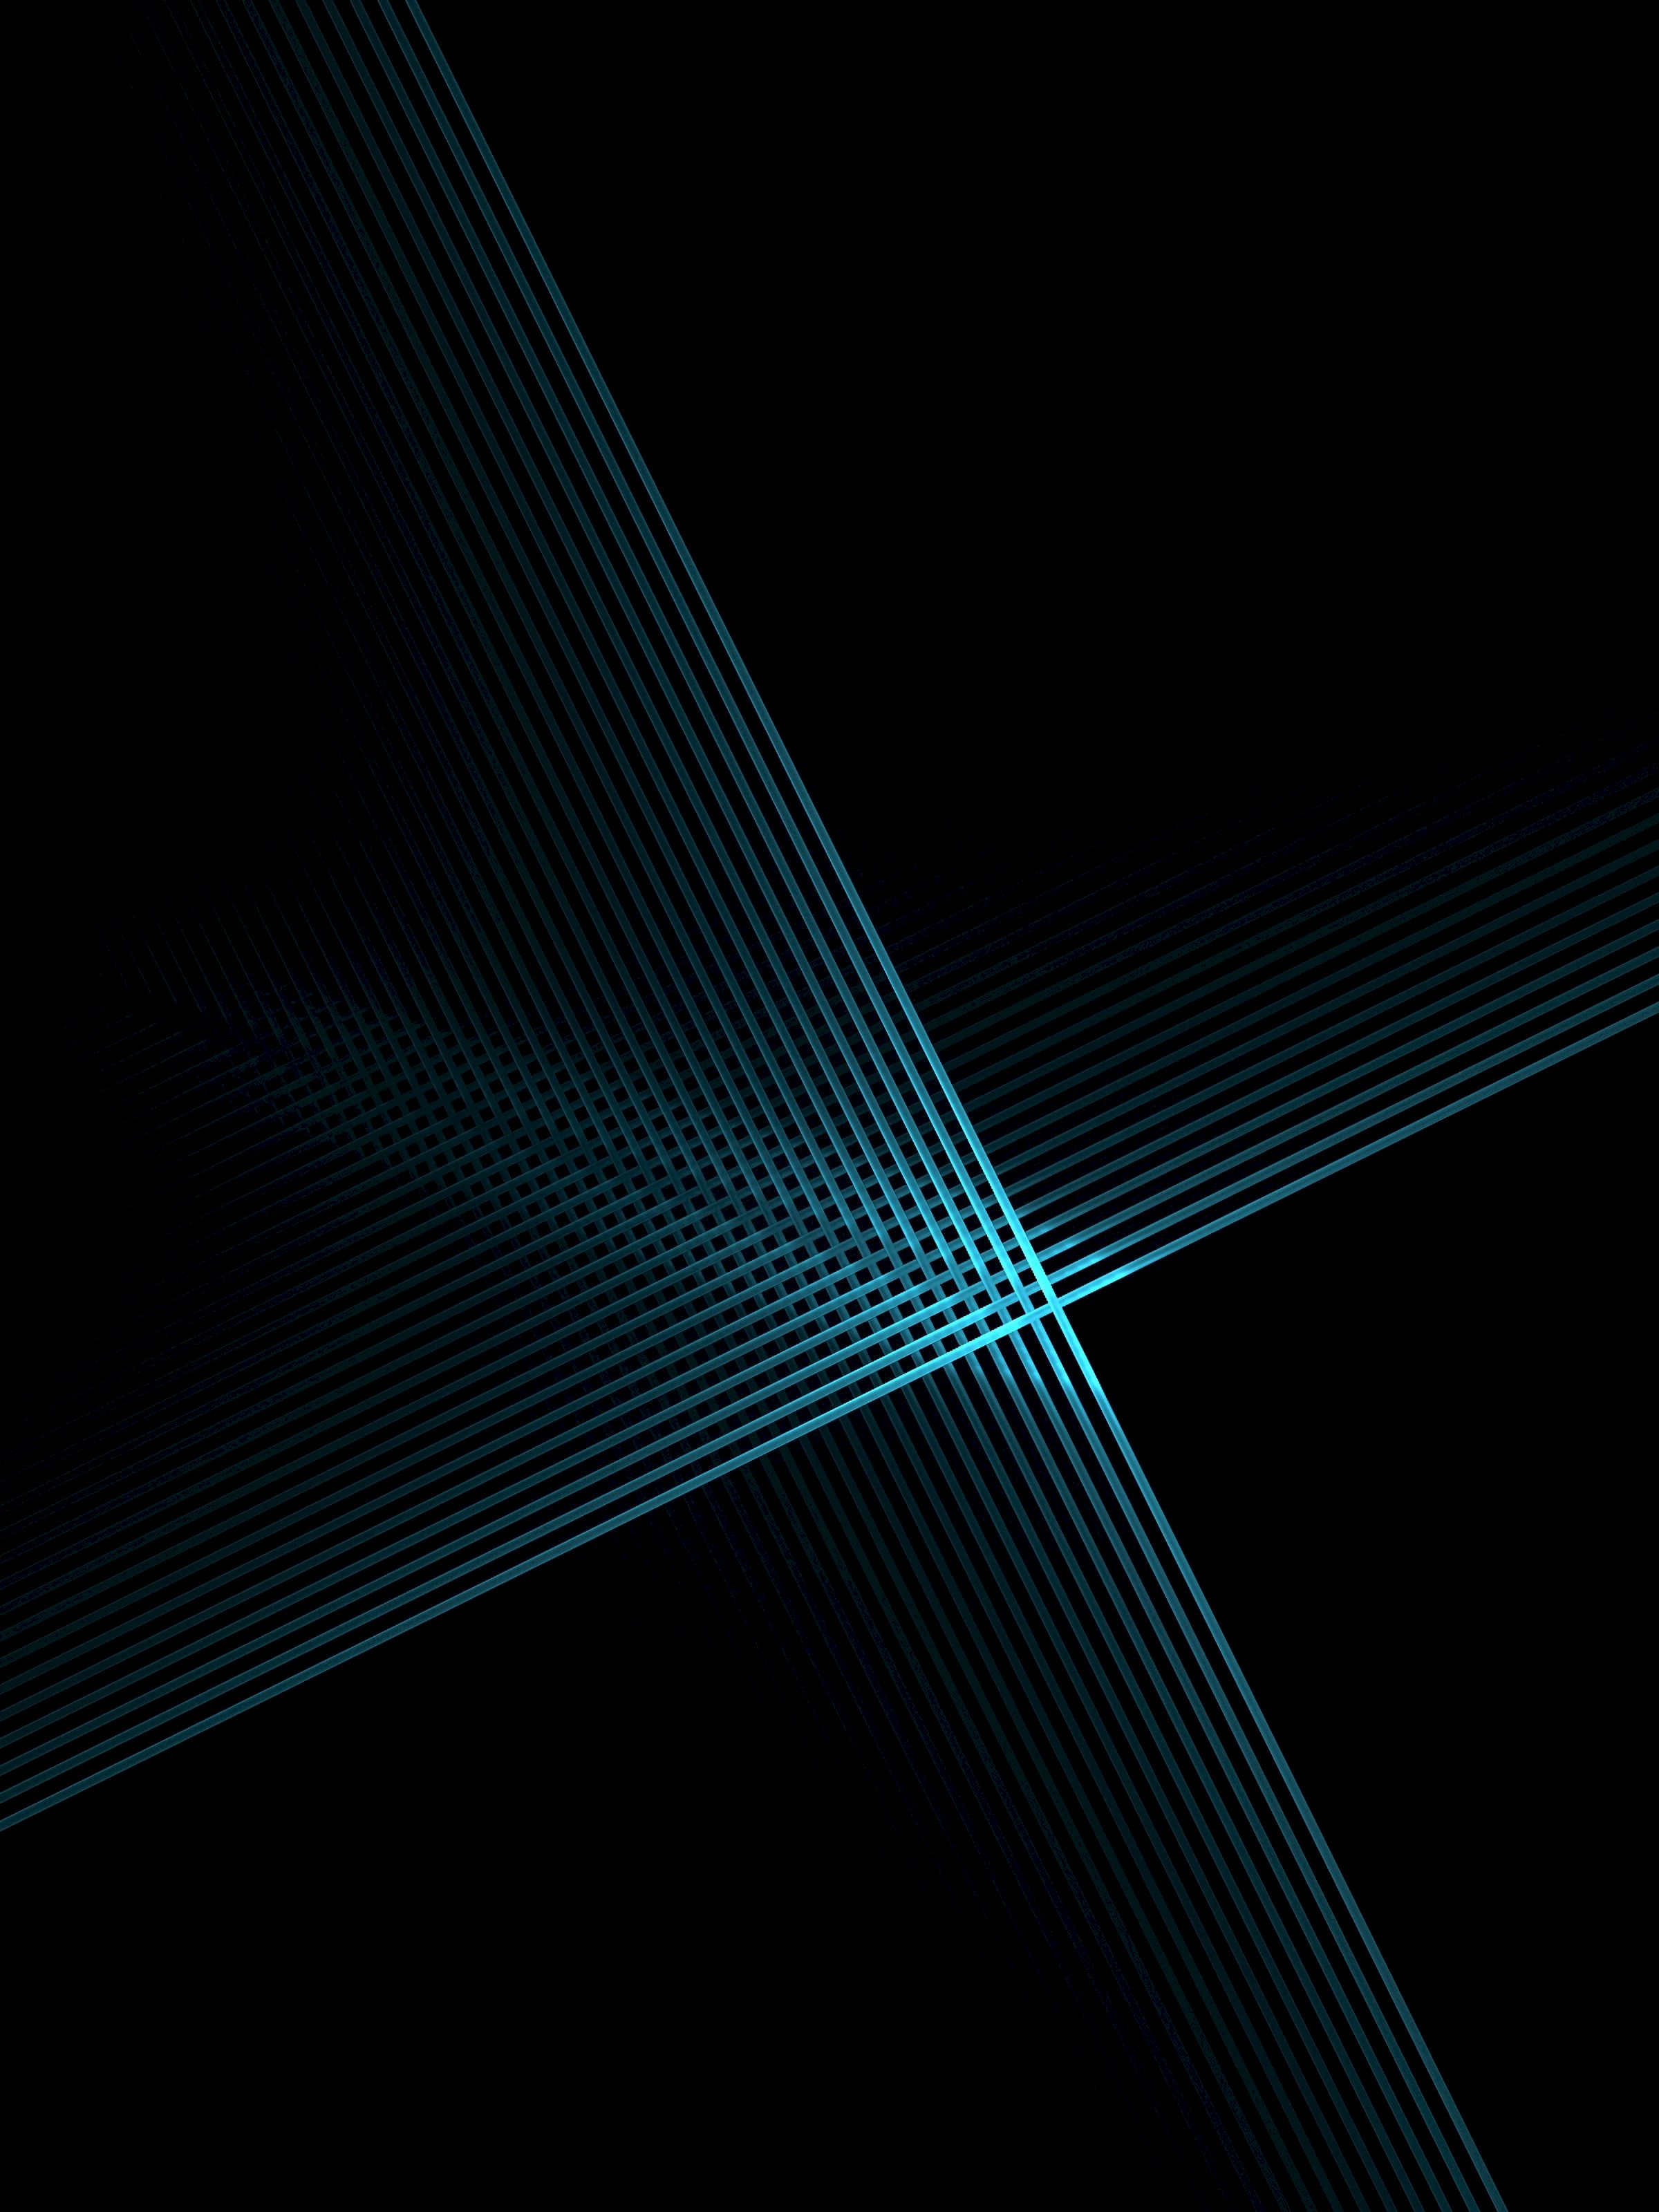 lines, abstract, dark, grid, weave Full HD